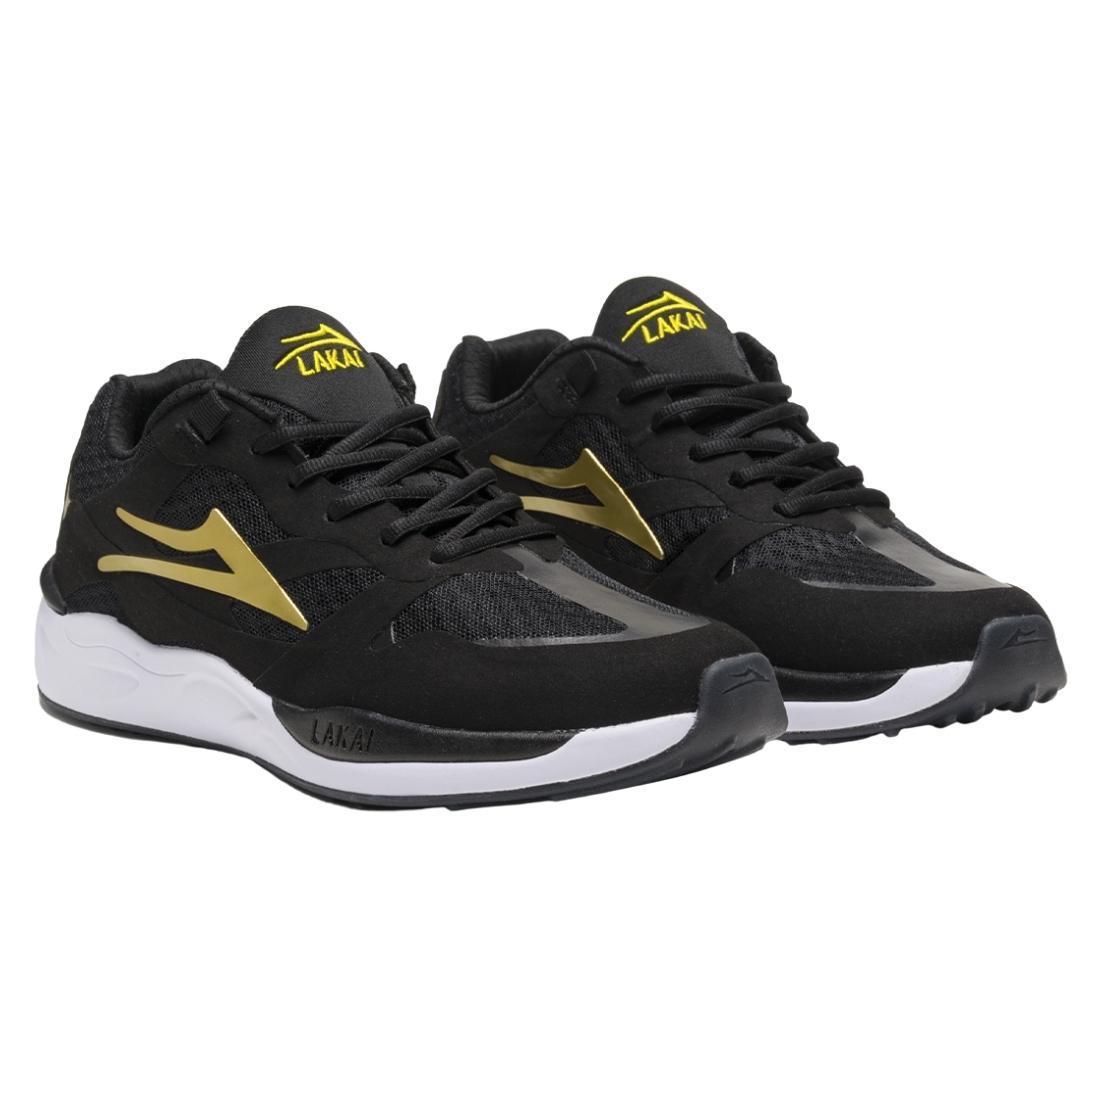 Lakai Evo 2.0 Shoes - Black/Gold Suede - Mens Running Shoes/Trainers by Lakai